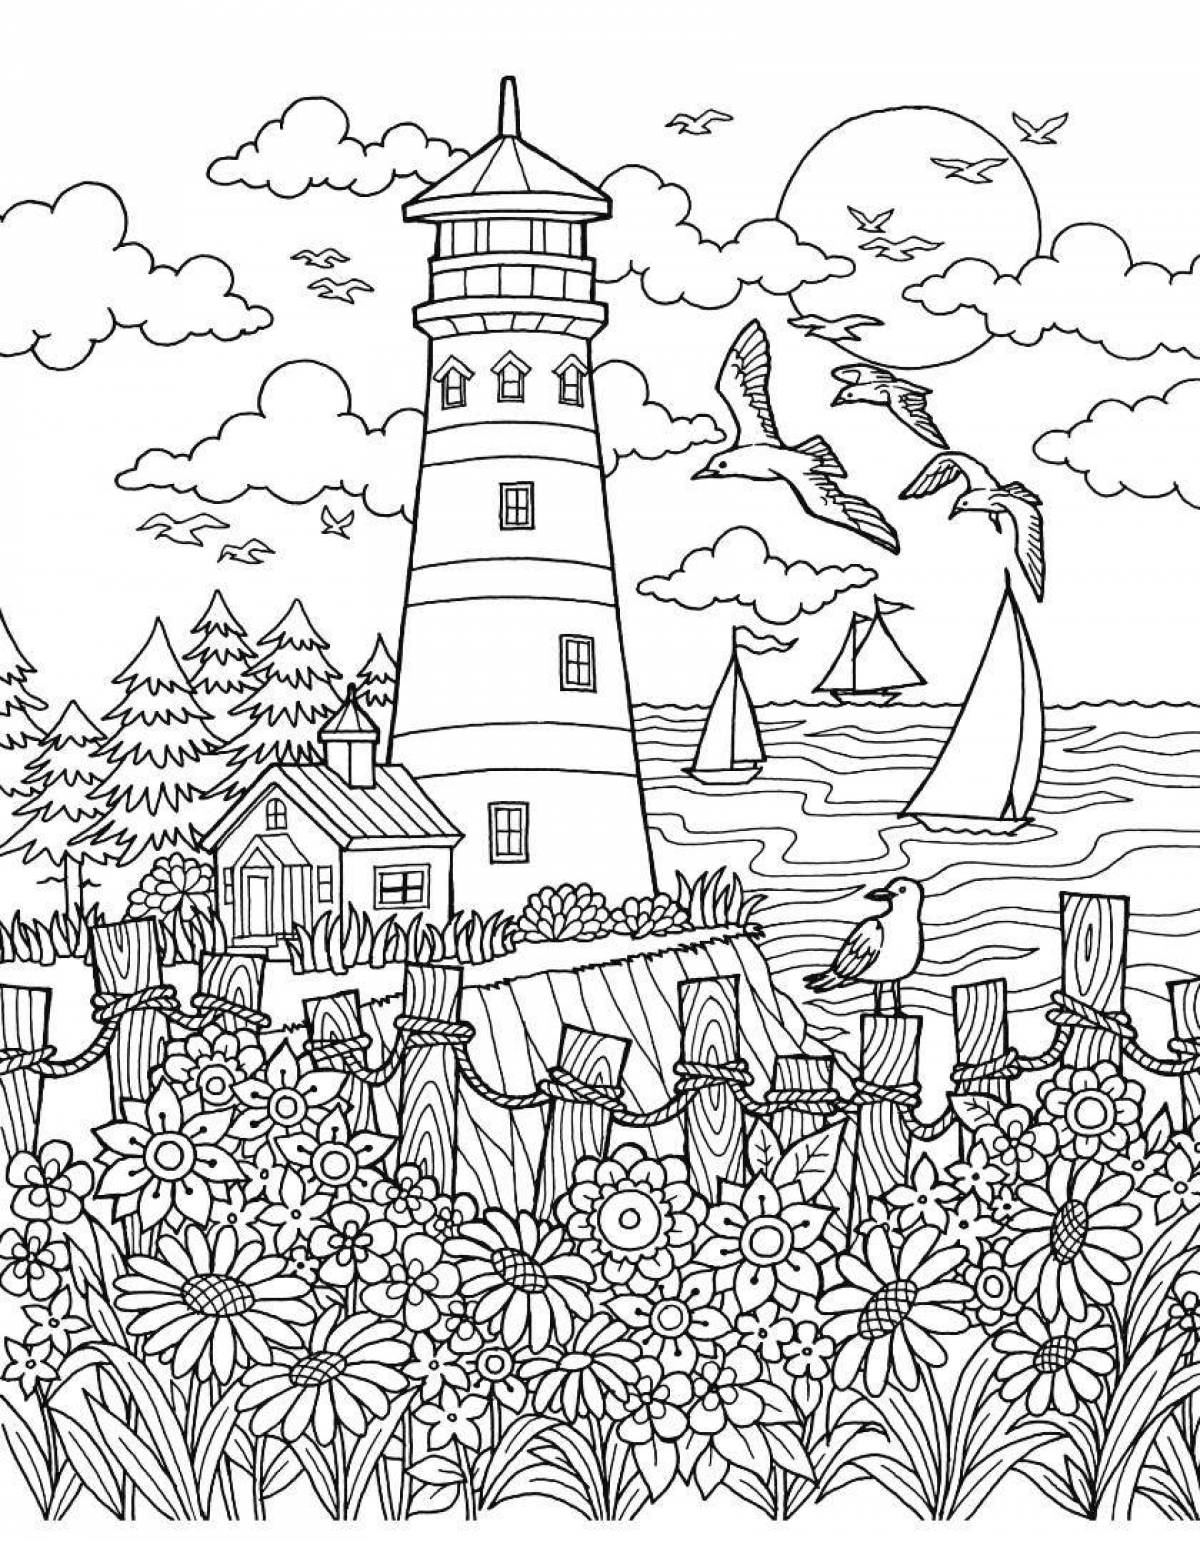 Sublime coloring page adult 18 природа